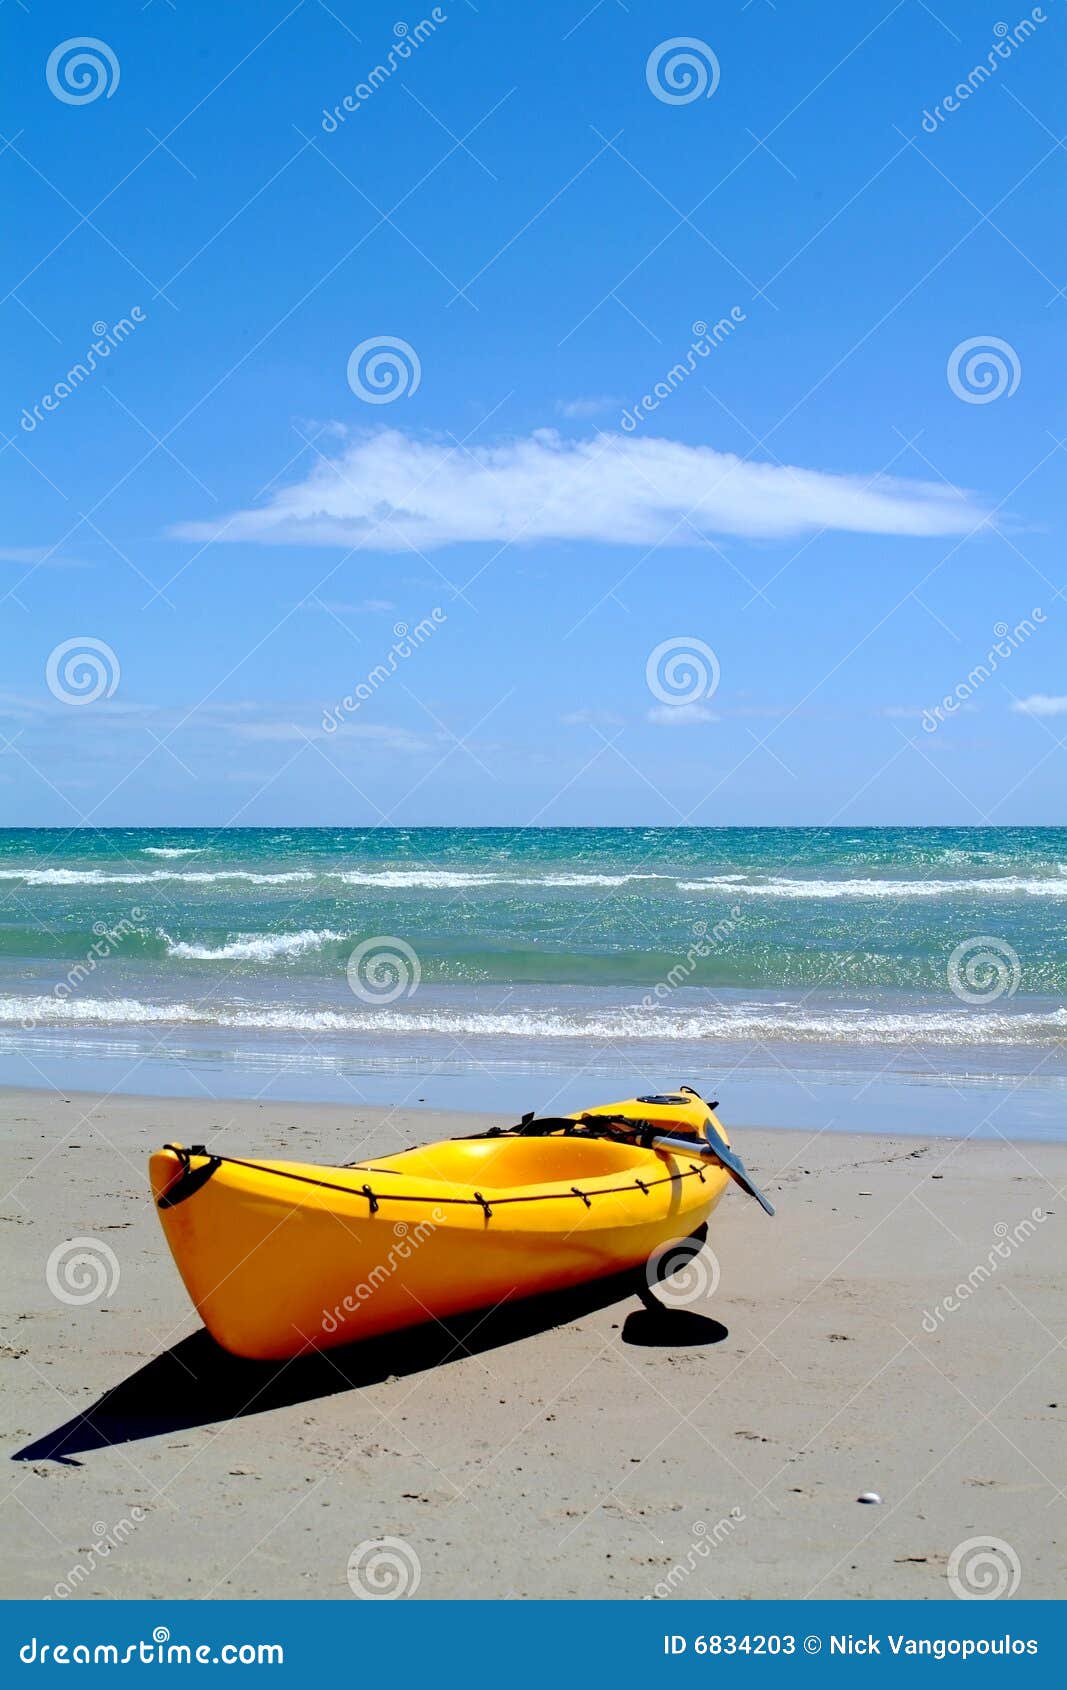 Yellow surf rescue canoe stock image. Image of surf, water - 6834203